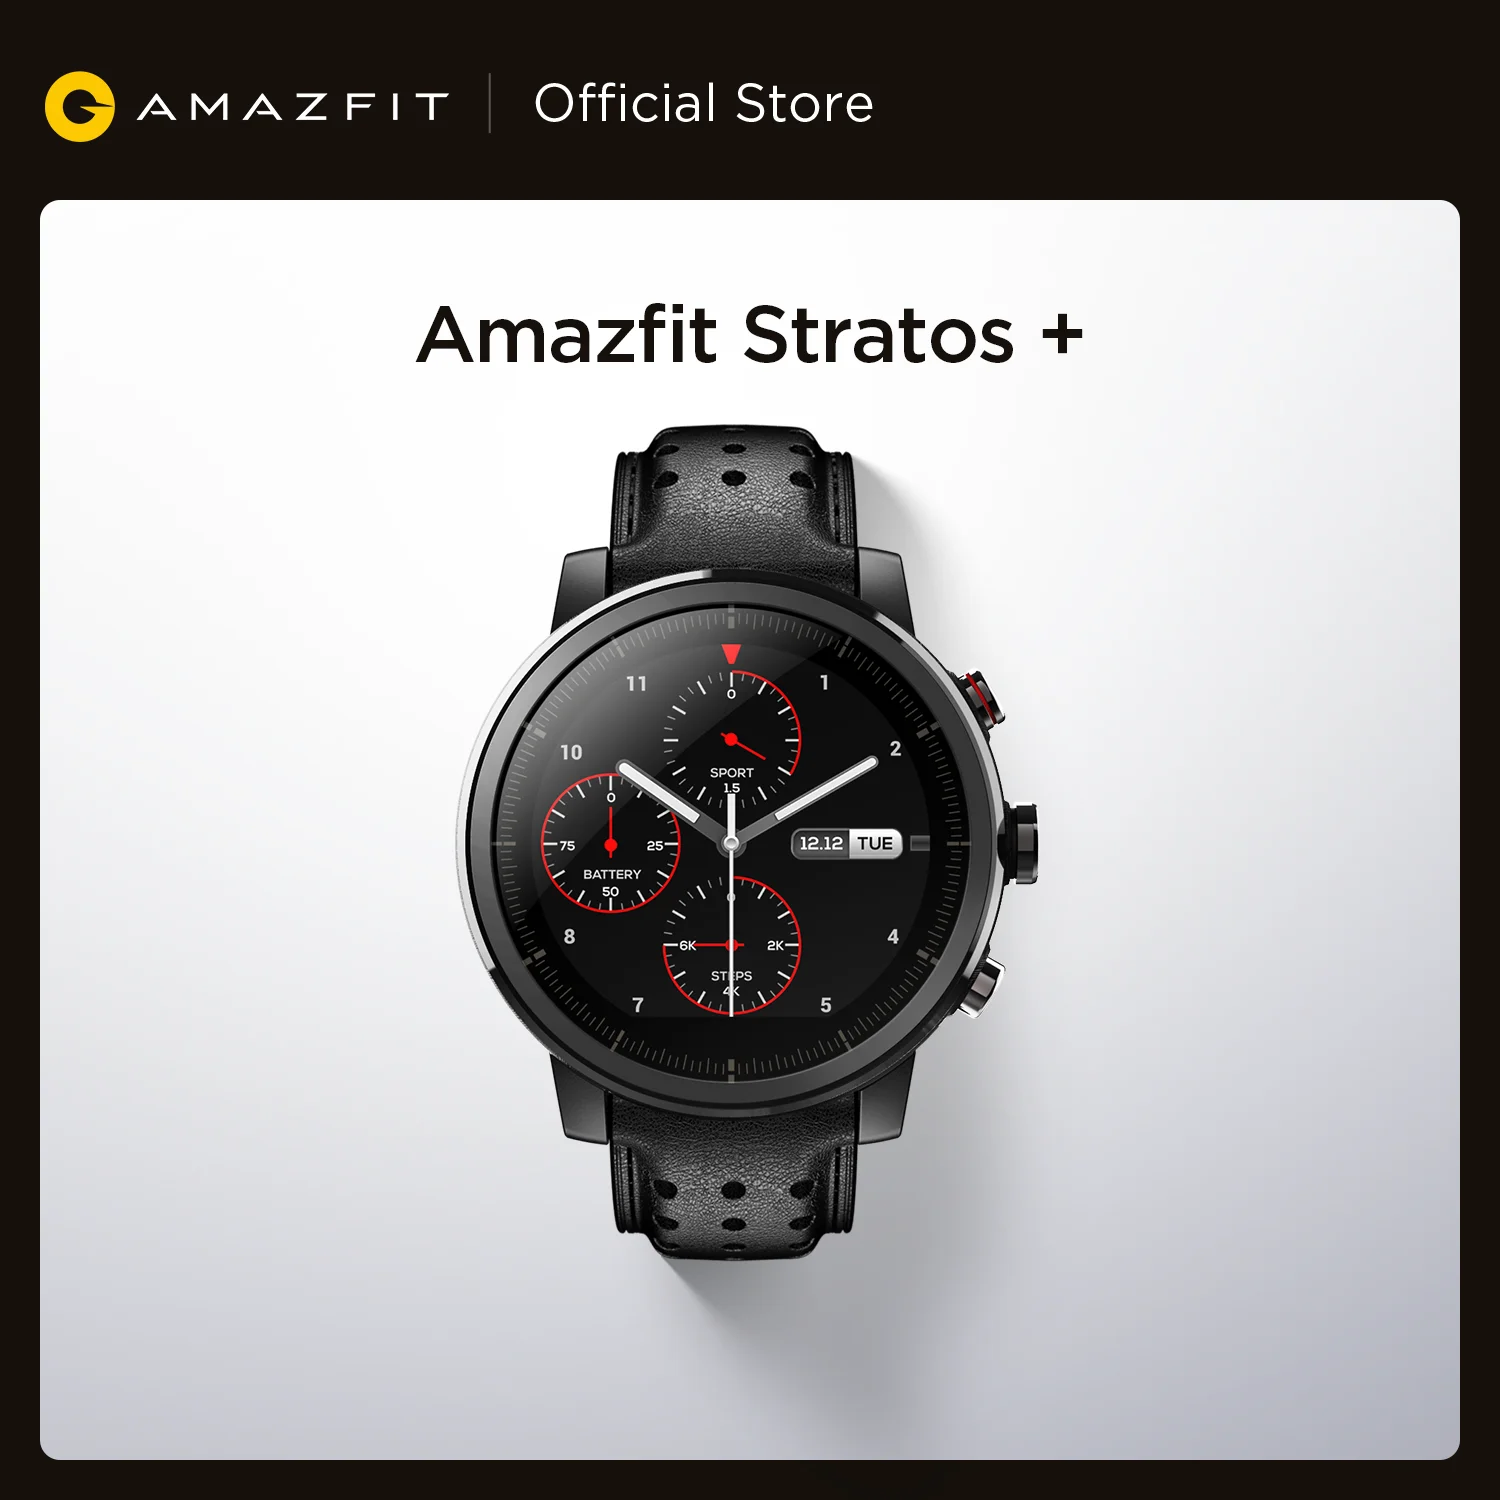 US $120.00 2019 New Amazfit Stratos Professional Smart Watch Genuine Leather Strap Gift Box Sapphire 2S for Android iOS Phone